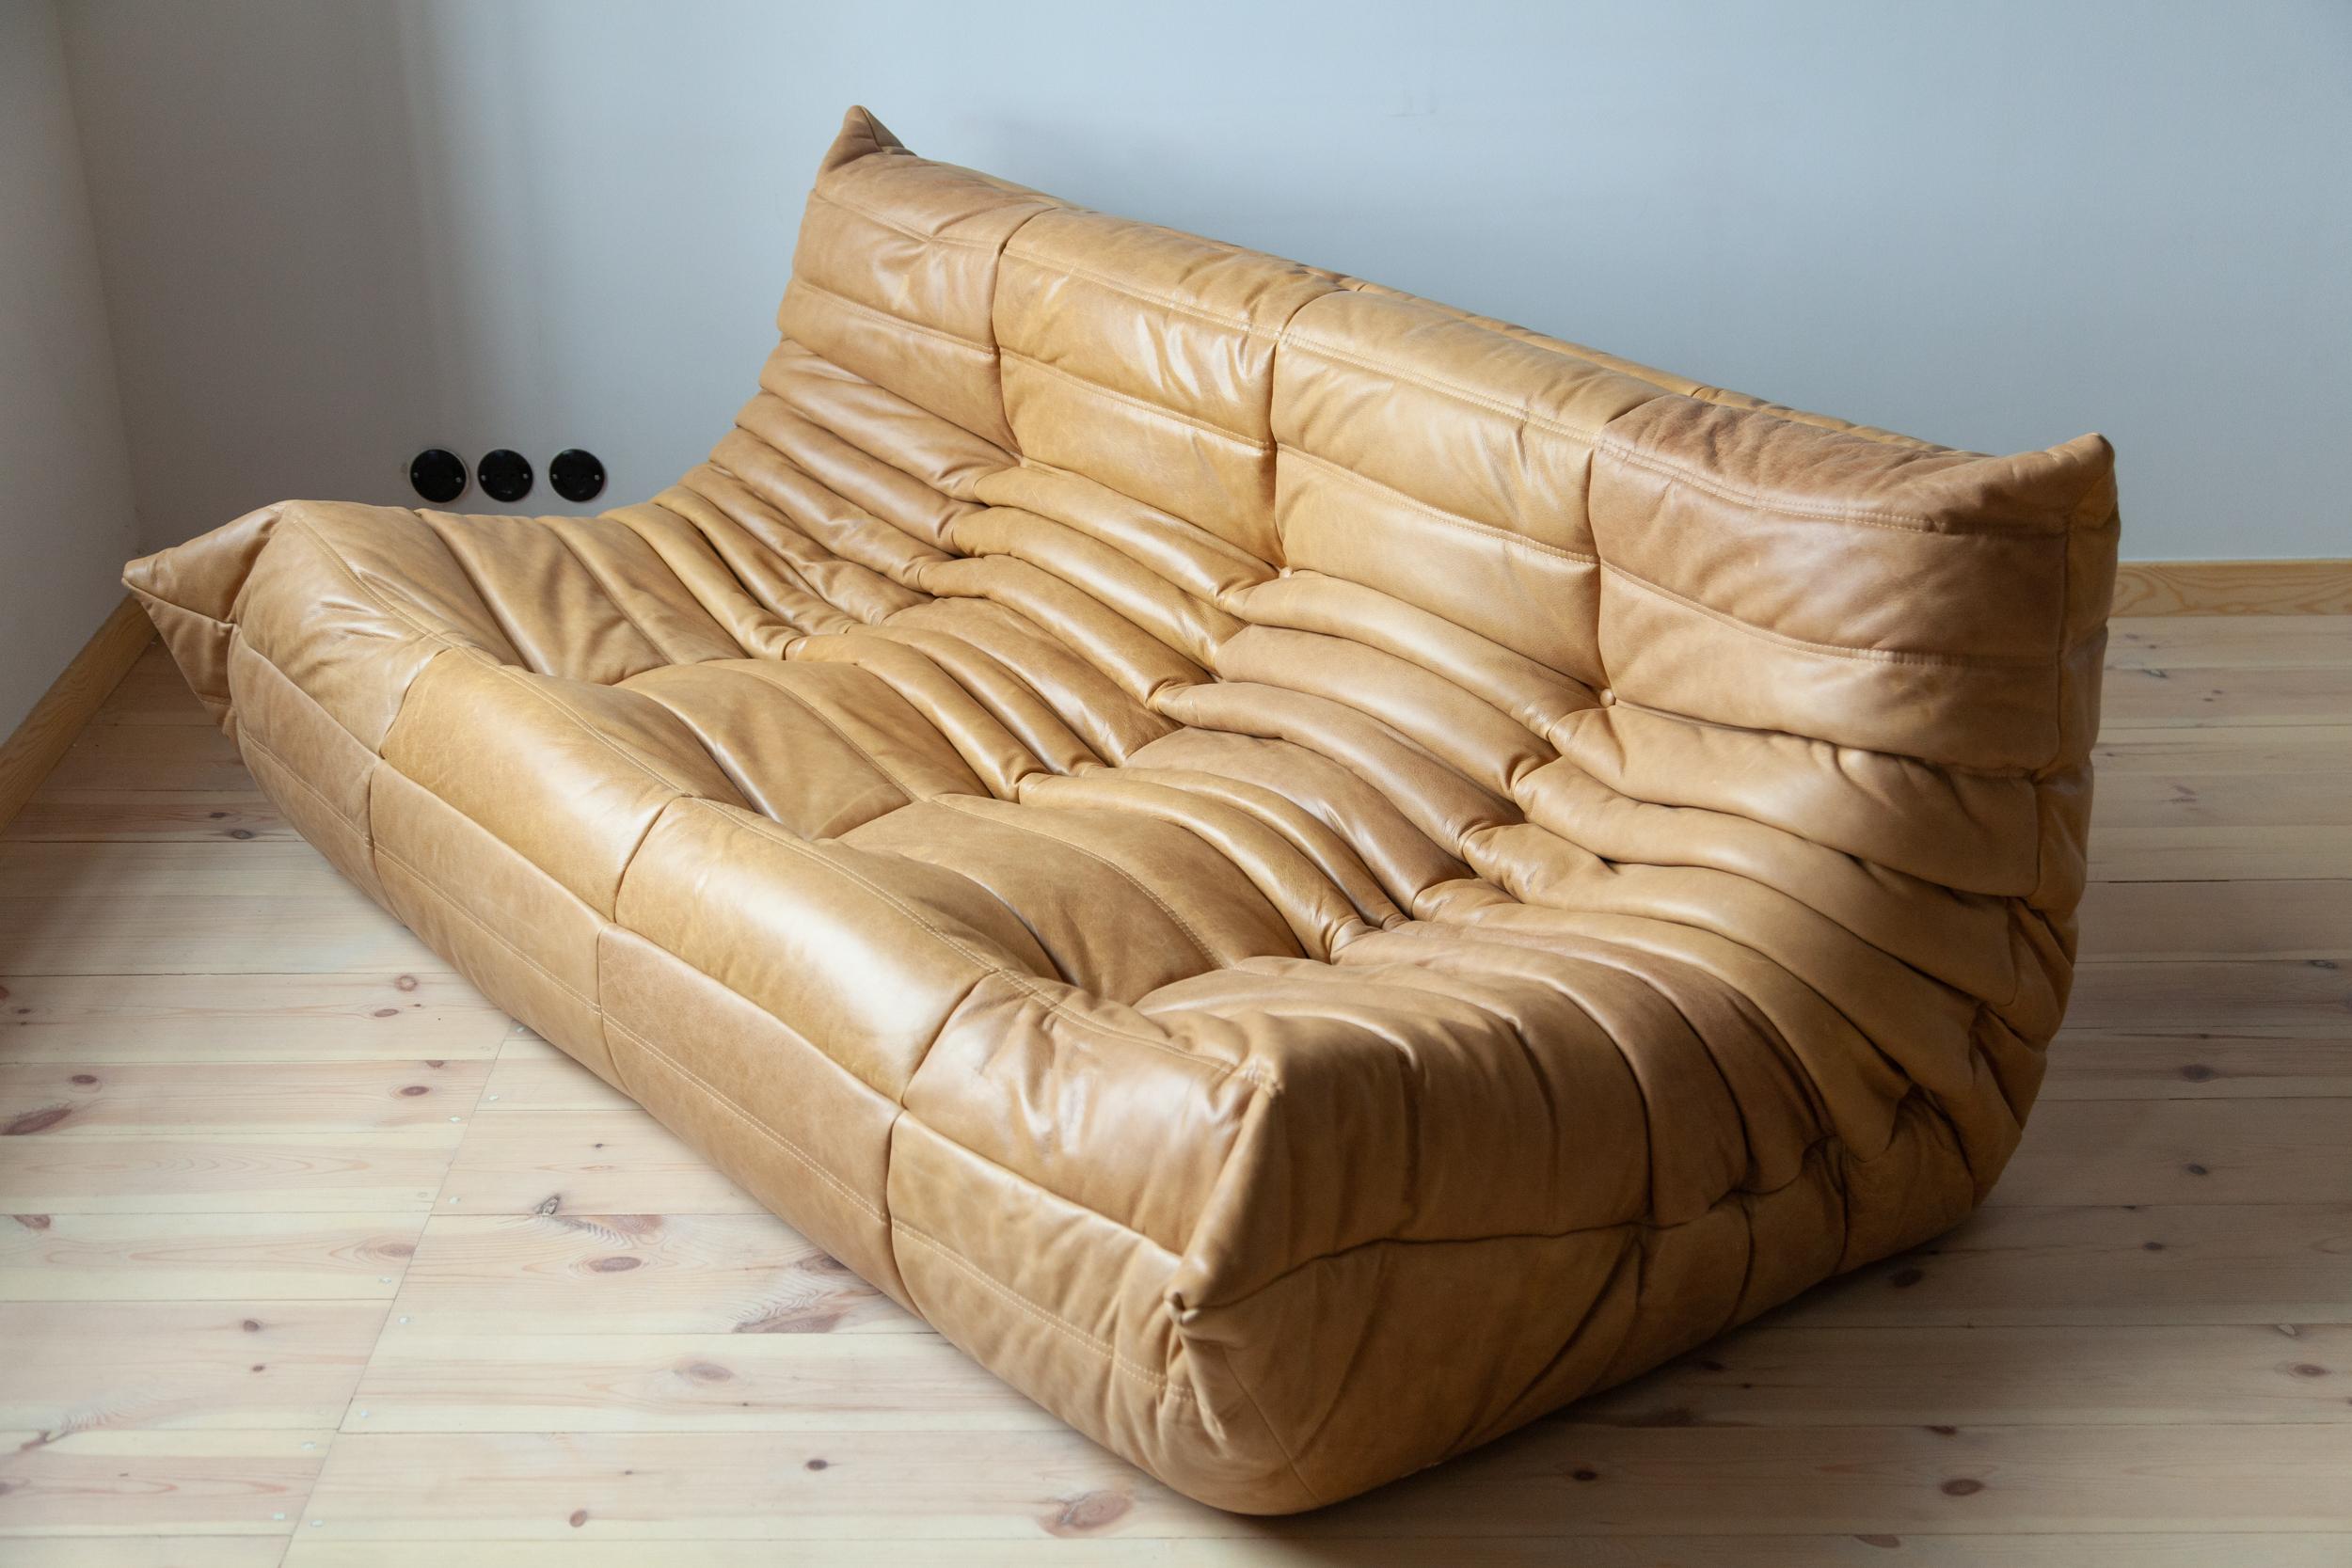 This Togo three-seat sofa was designed by Michel Ducaroy in 1973 and was manufactured by Ligne Roset in France. It has been reupholstered in new camel brown leather (70 x 174 x 102 cm). It has the original Ligne Roset logo and genuine Ligne Roset